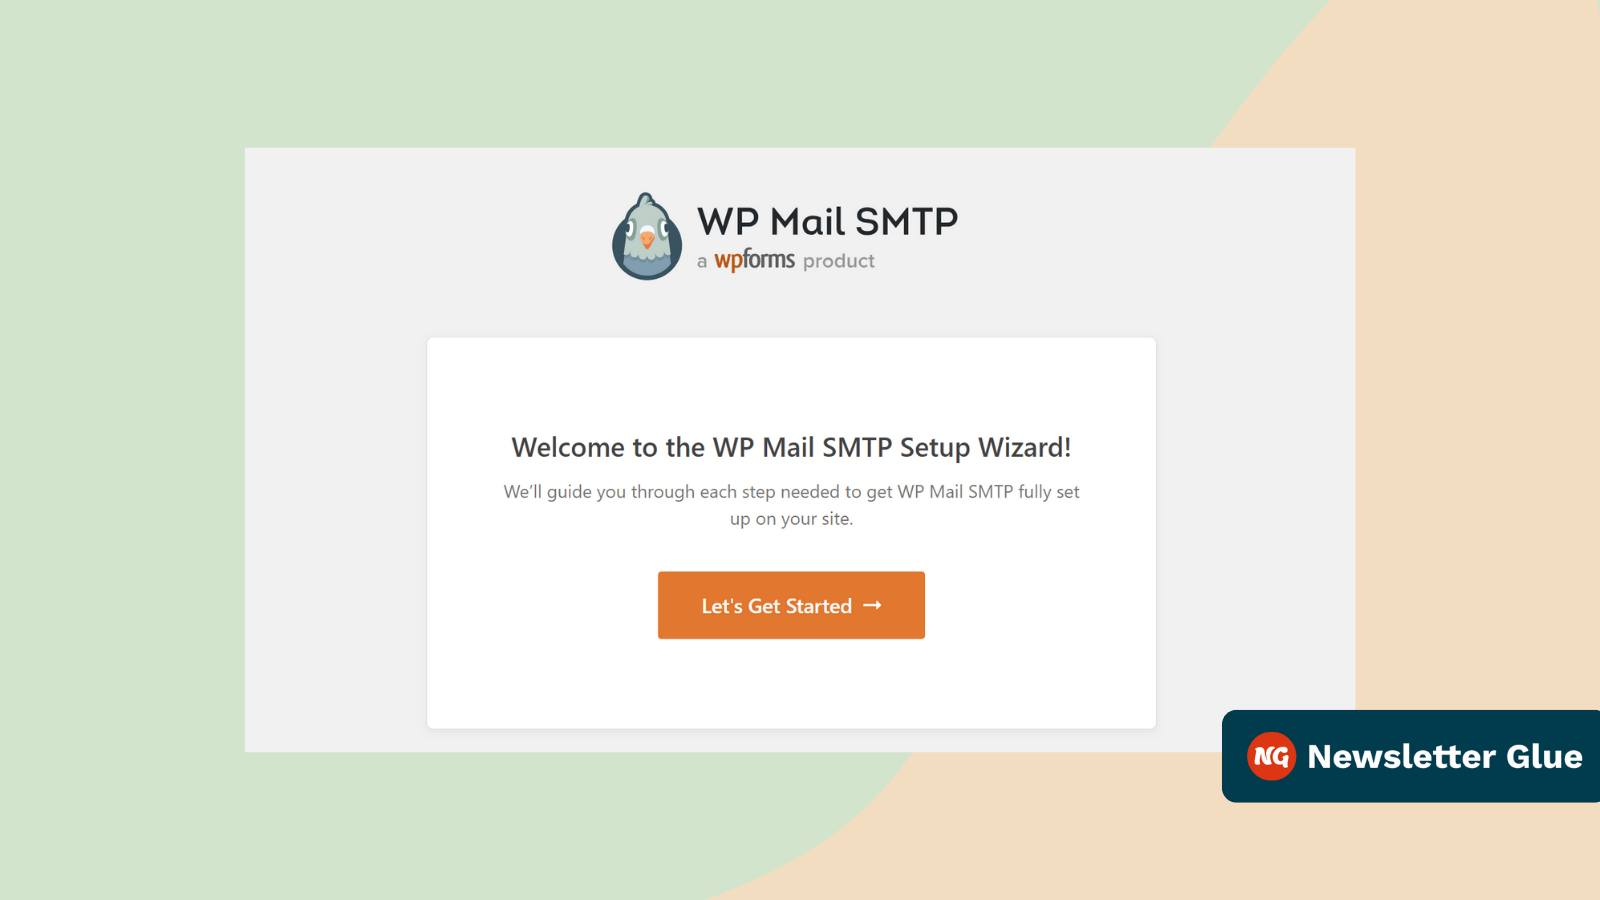 How to fix the WordPress email not sending issue with WP Mail SMTP